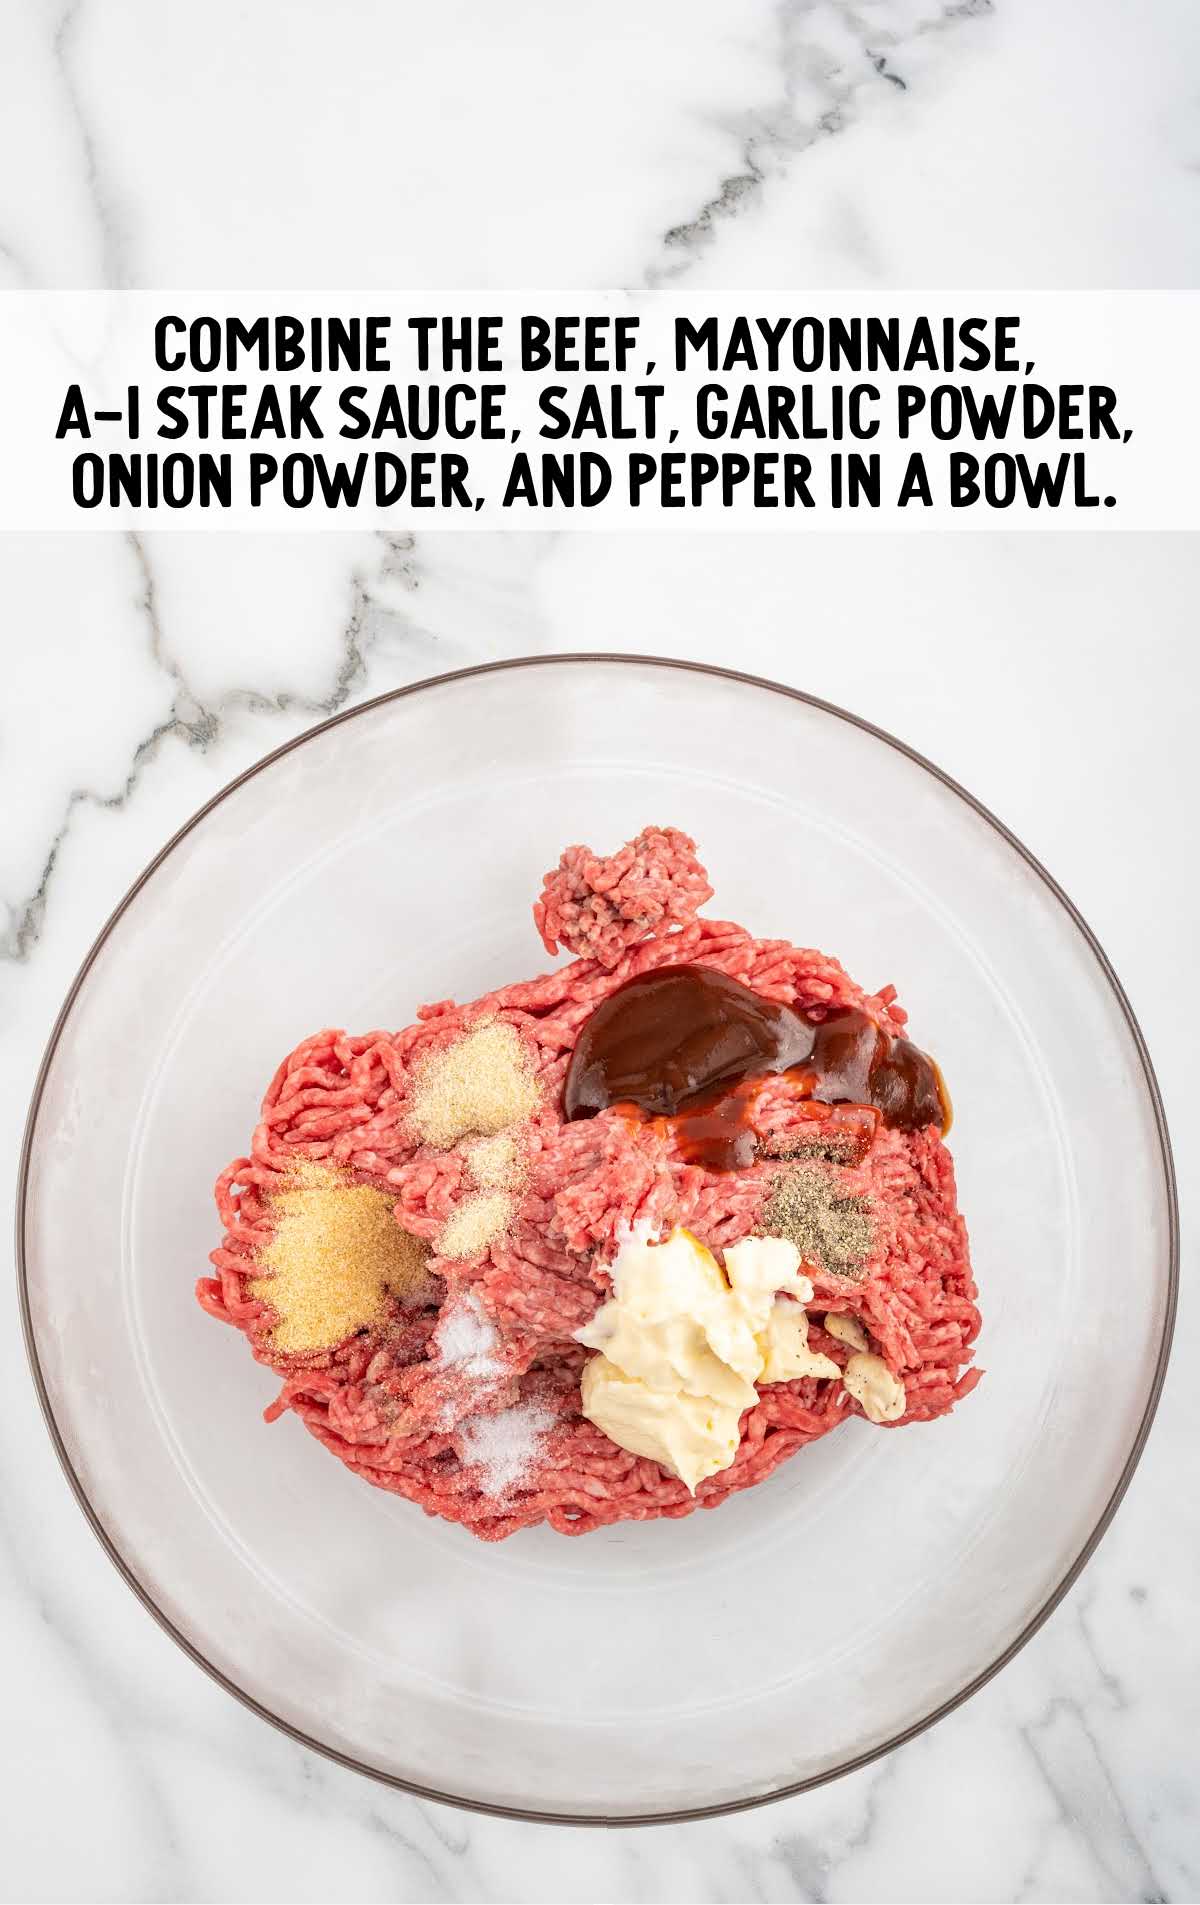 ground beef, mayonnaise, A-1 steak sauce, salt, garlic powder, onion powder, and black pepper combined in a bowl